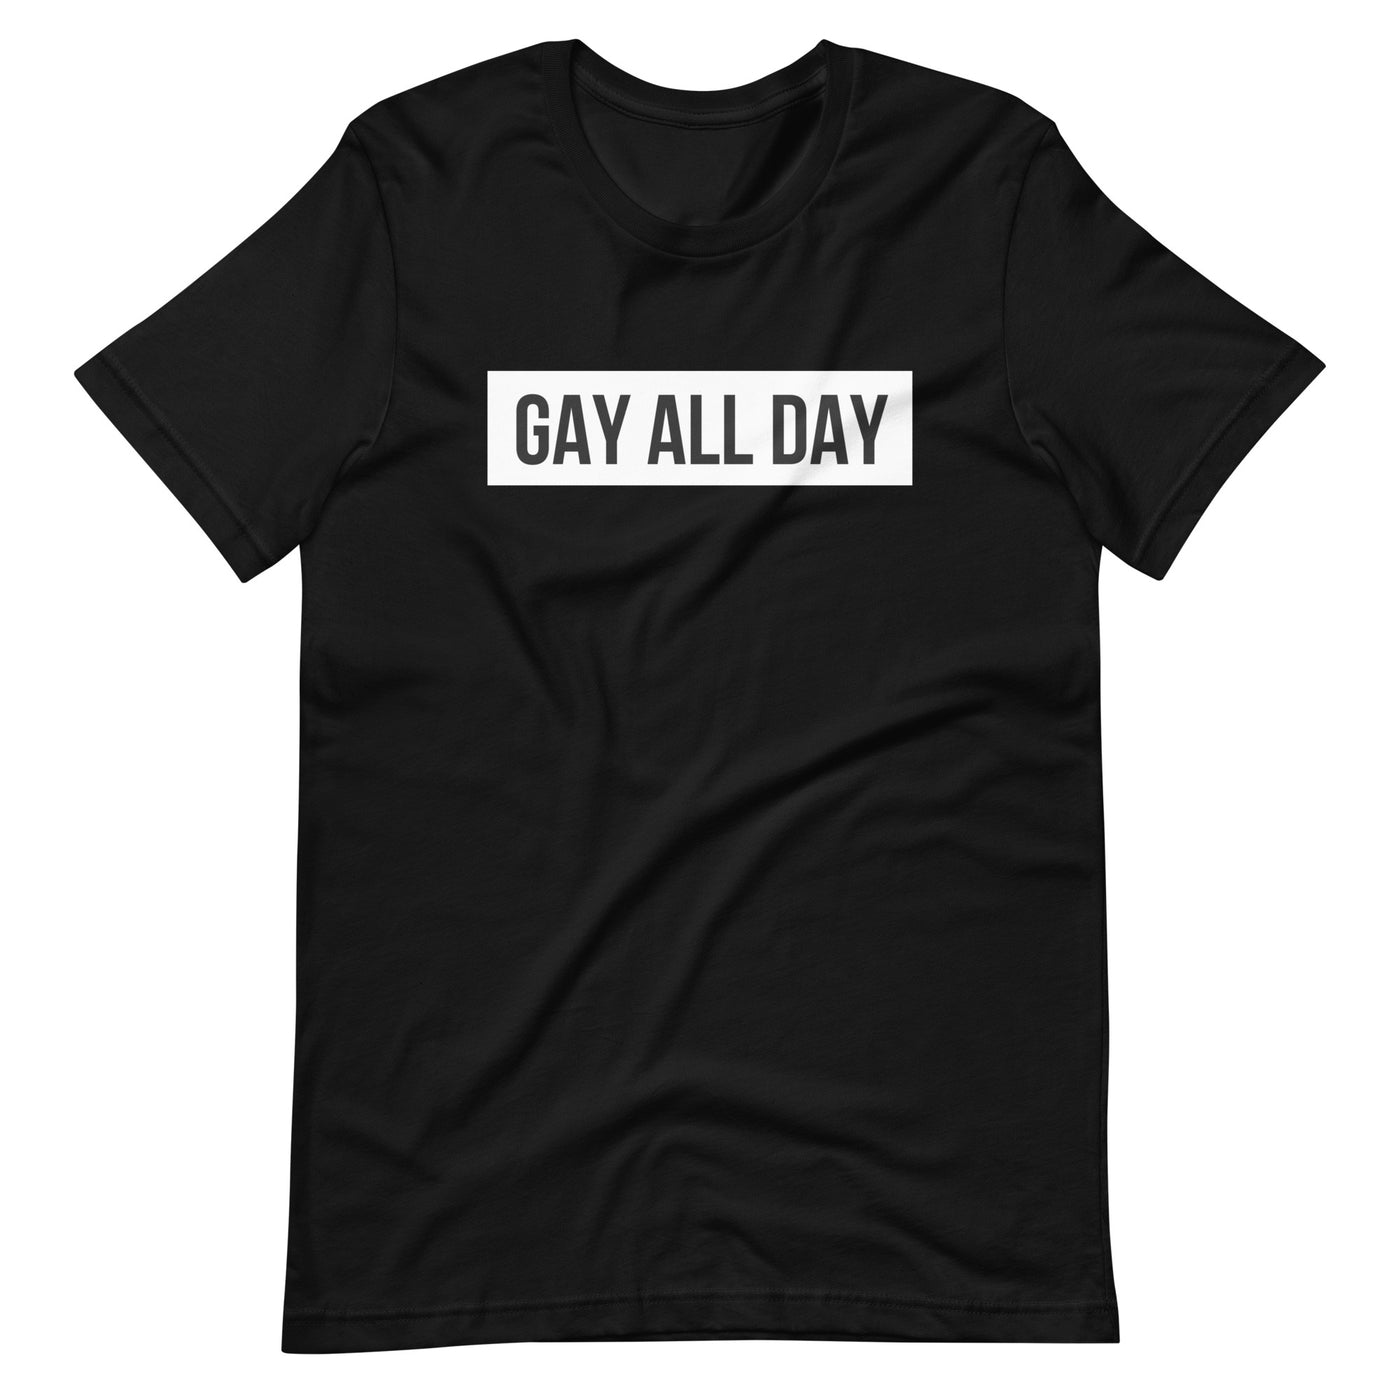 Pride Clothes - Like the Sun's Rays I Am Fabulously GAY ALL DAY TShirt - Black